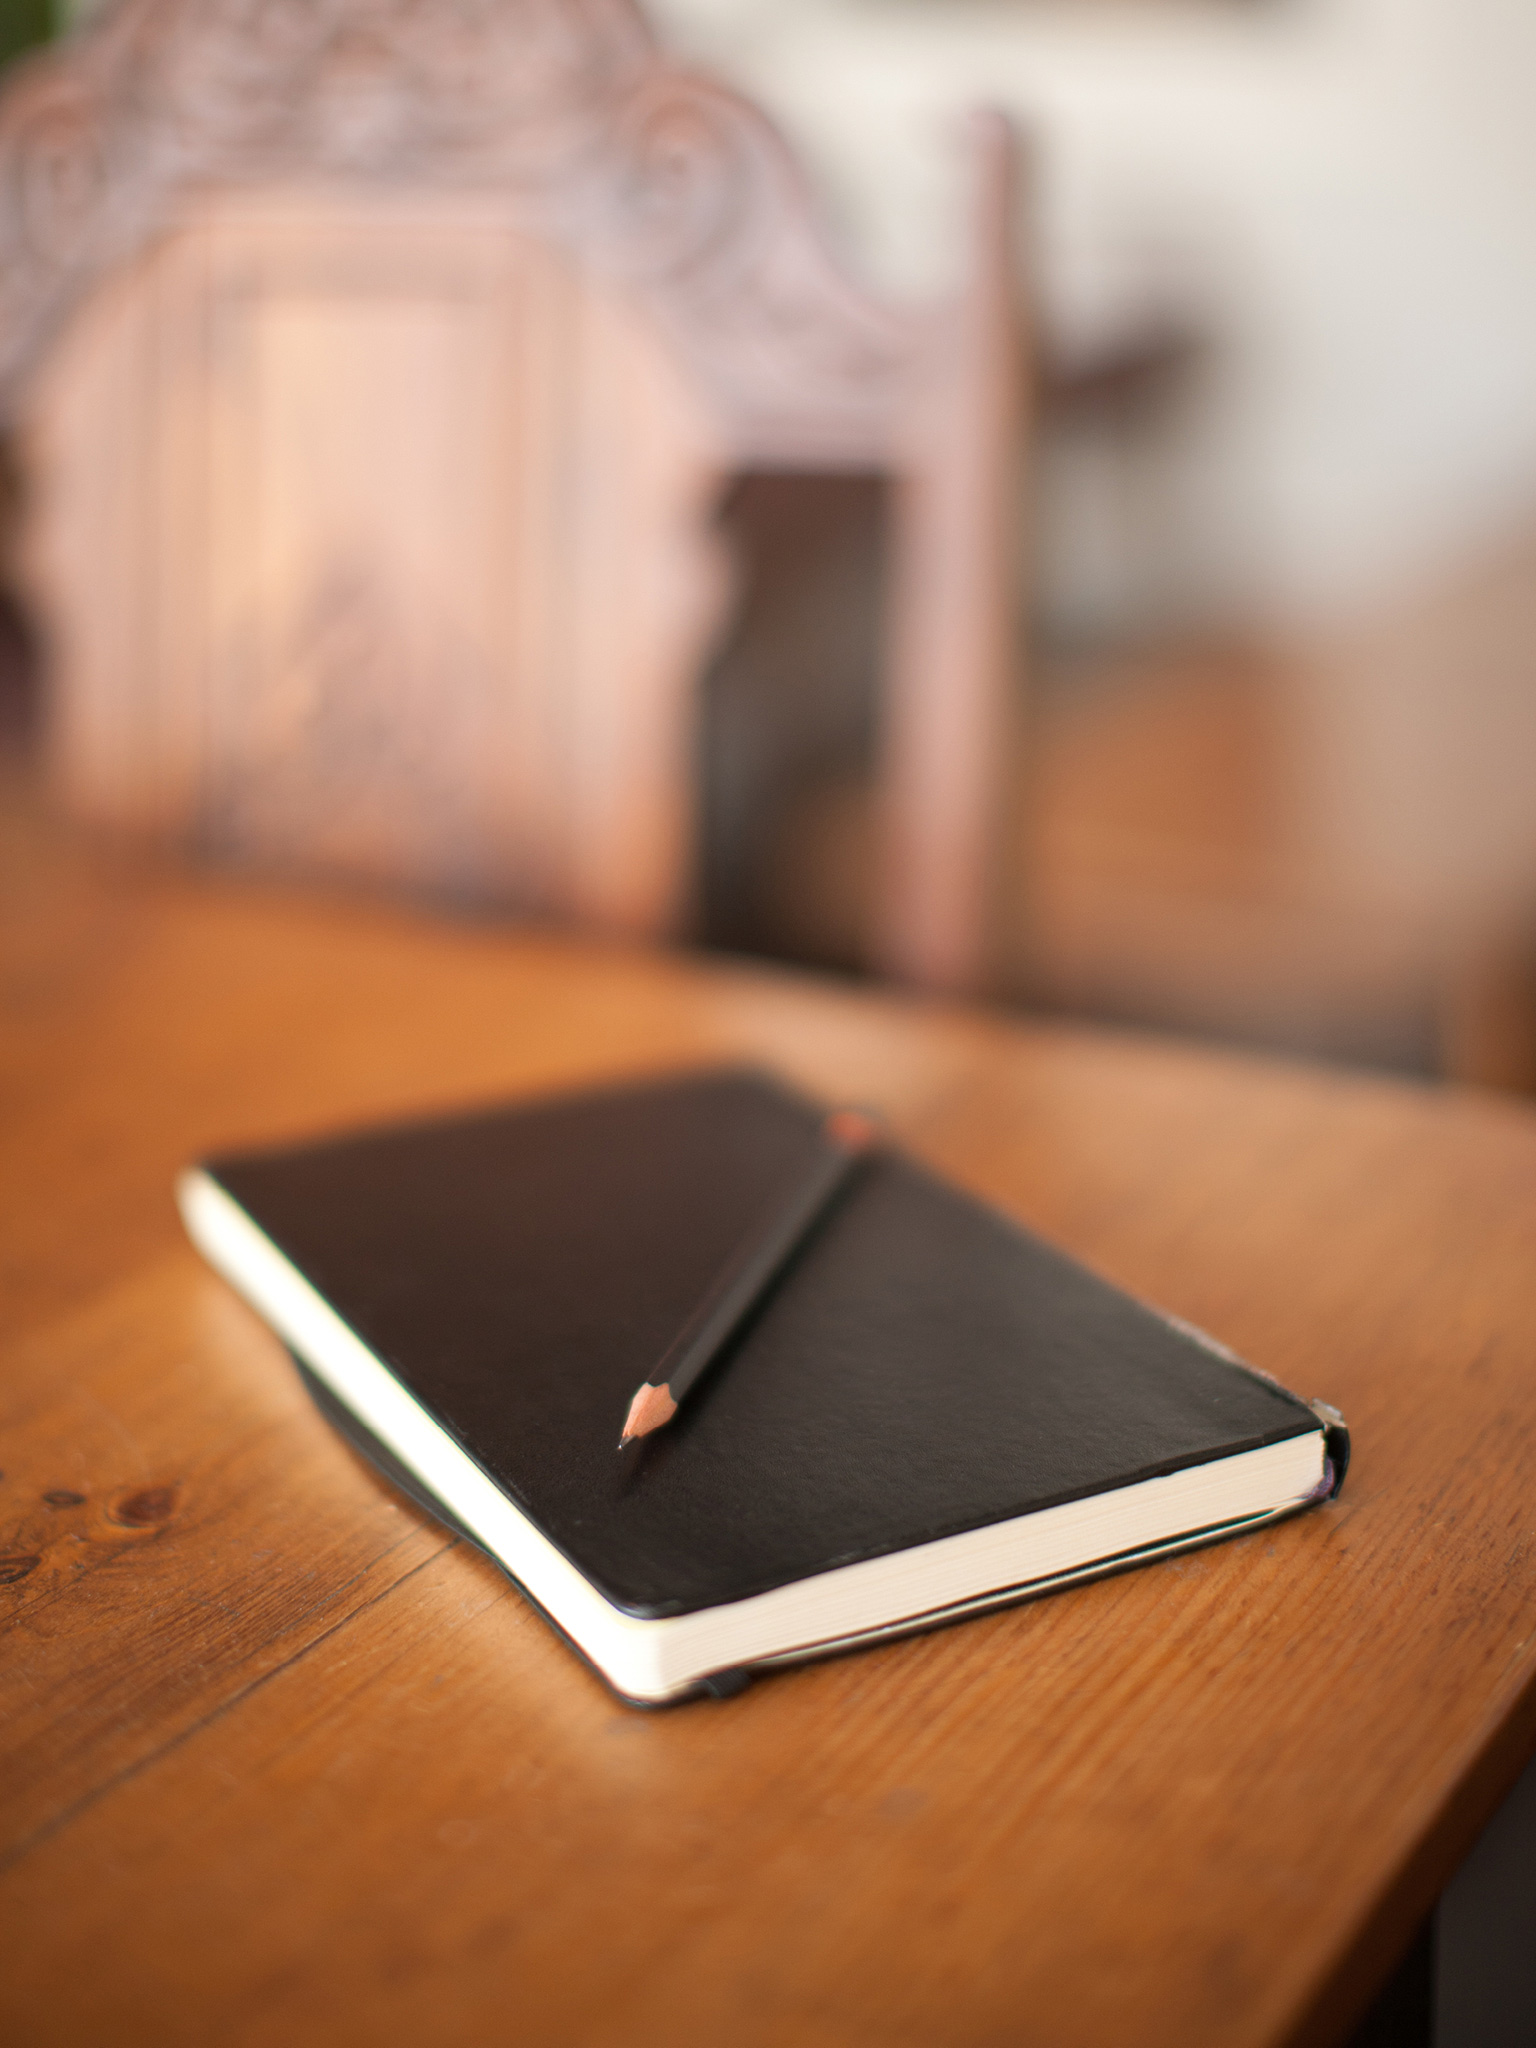 Using focus to highlight subject; bokeh photography example, leather notebook.